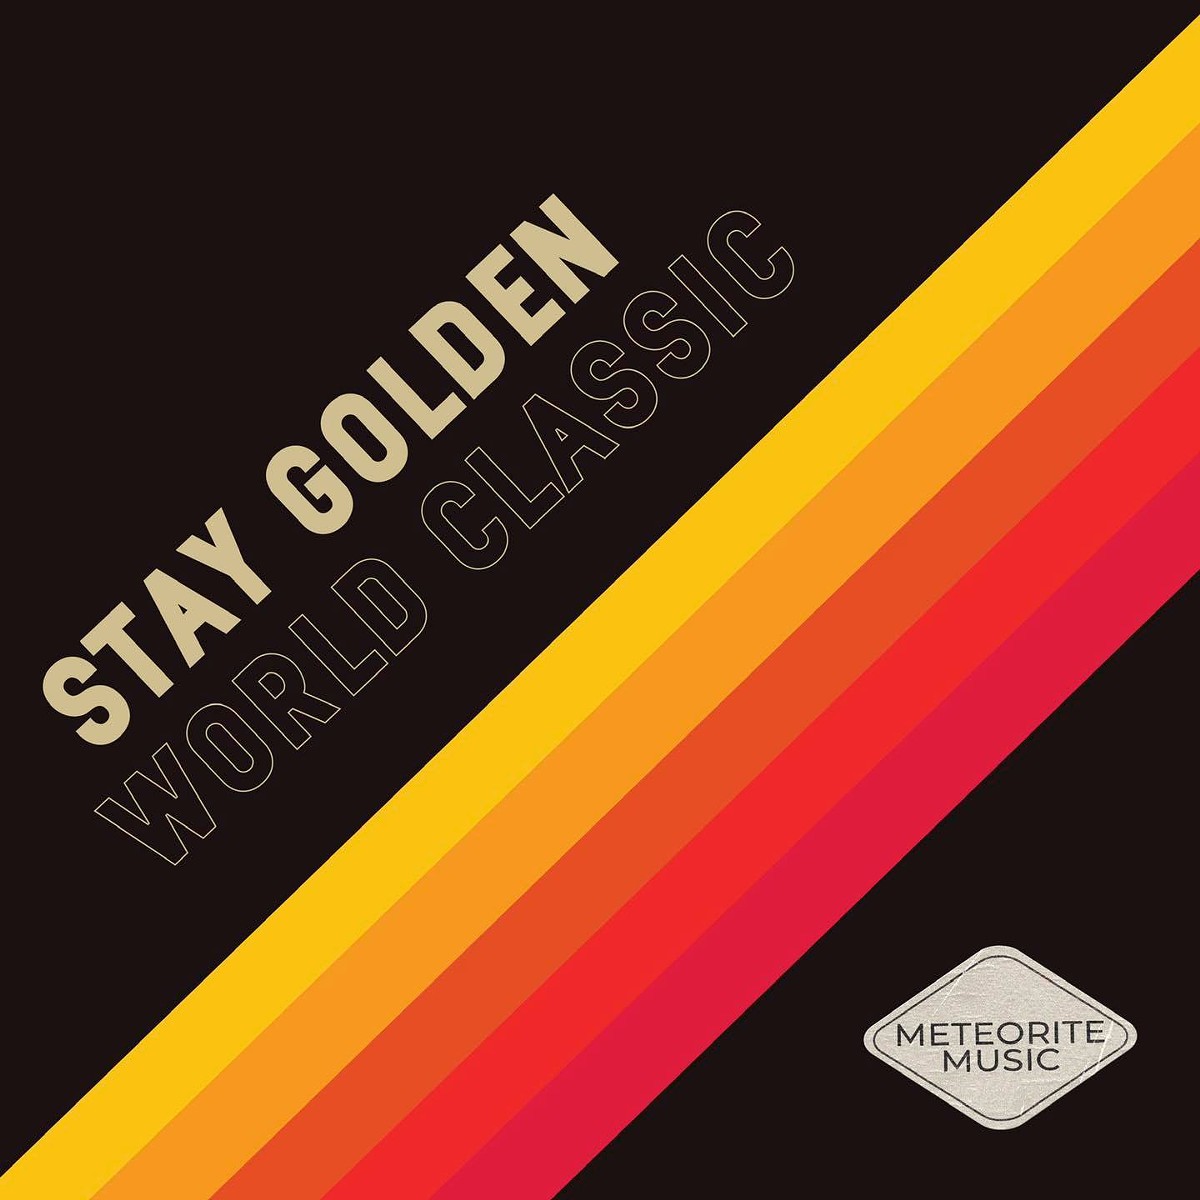 Stay Golden's World Classic is the latest work by former VilleBillies' Dustin Tucker.